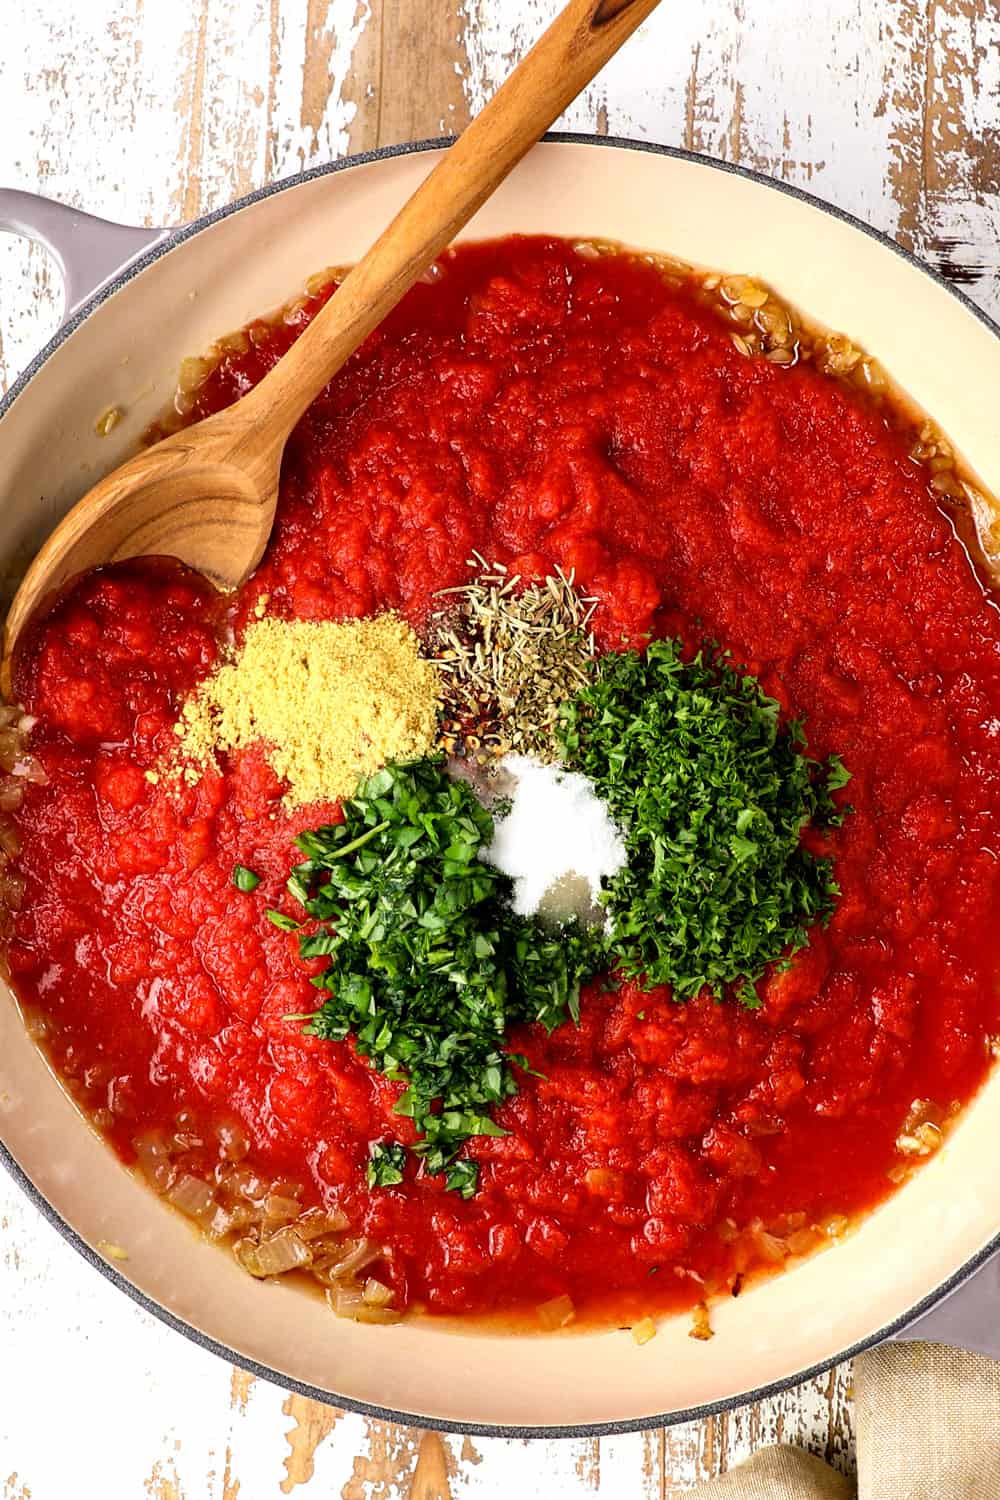 top view of tomato sauce showing the ingredients of crushed tomatoes, basil, parsley, oregano, thyme and sugar